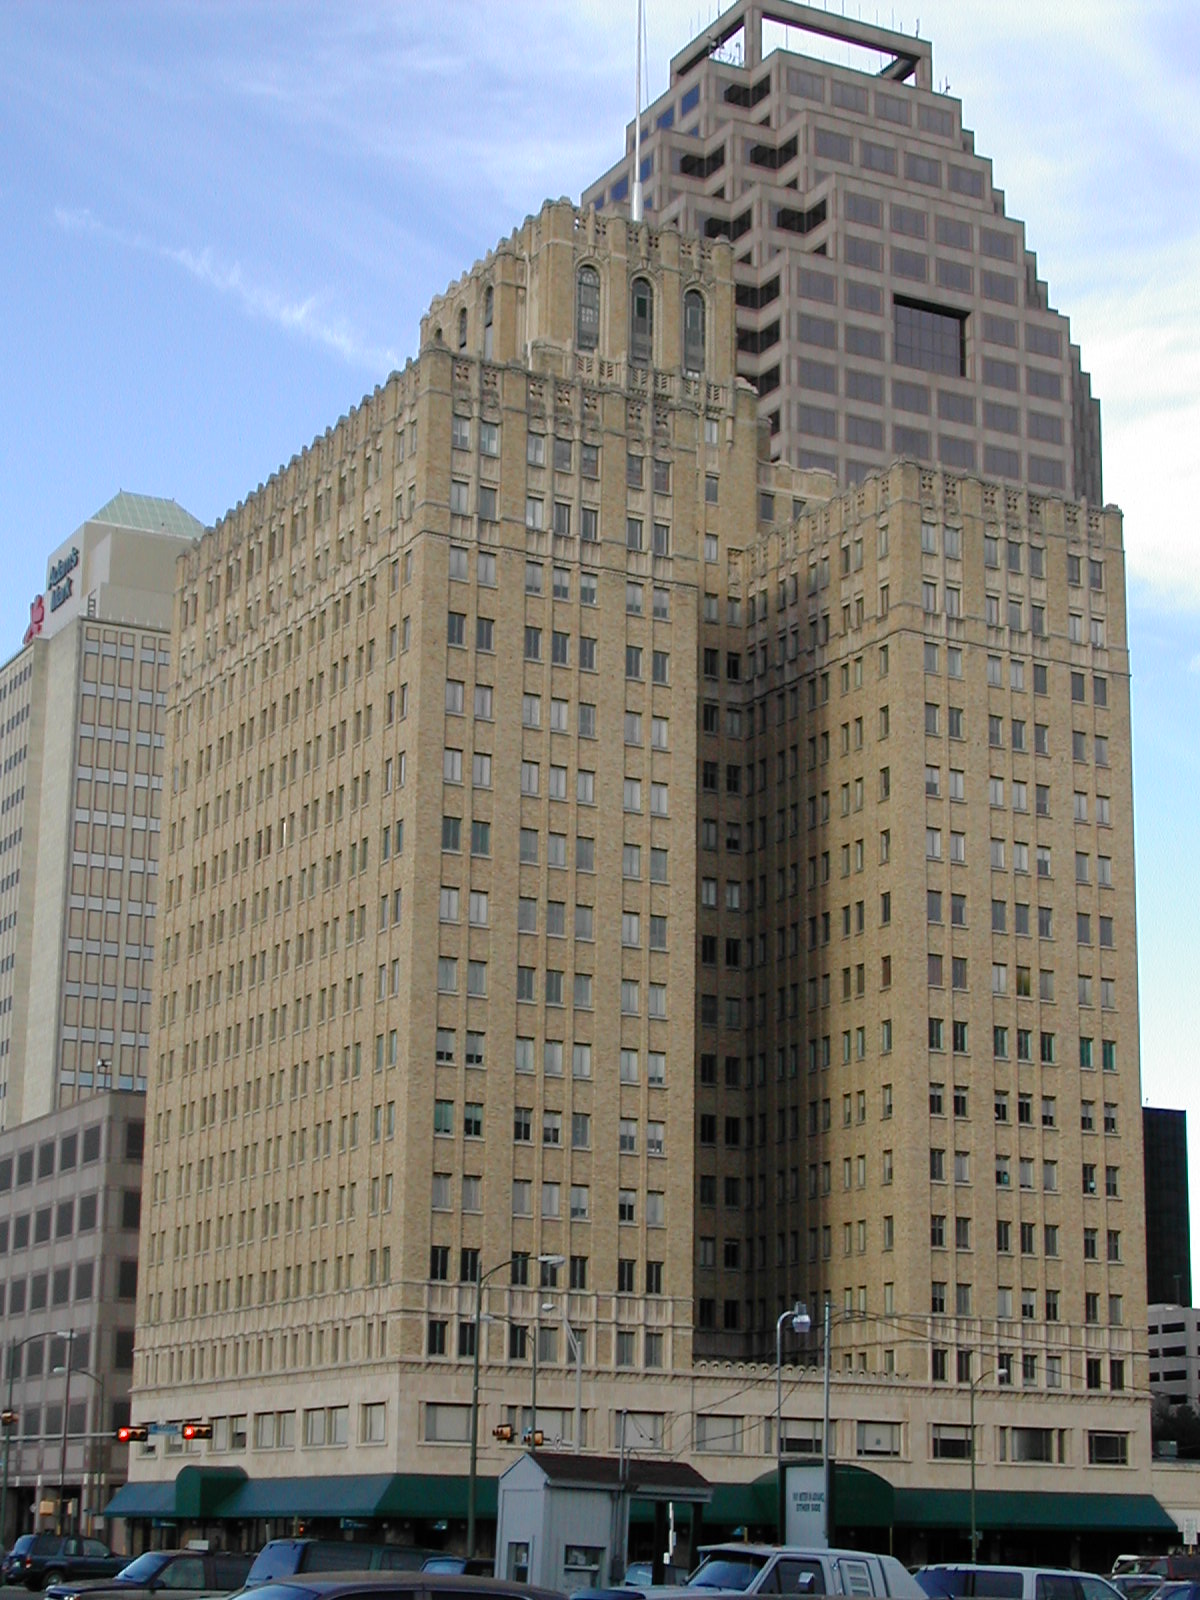 large tan building near parking spaces in a downtown area